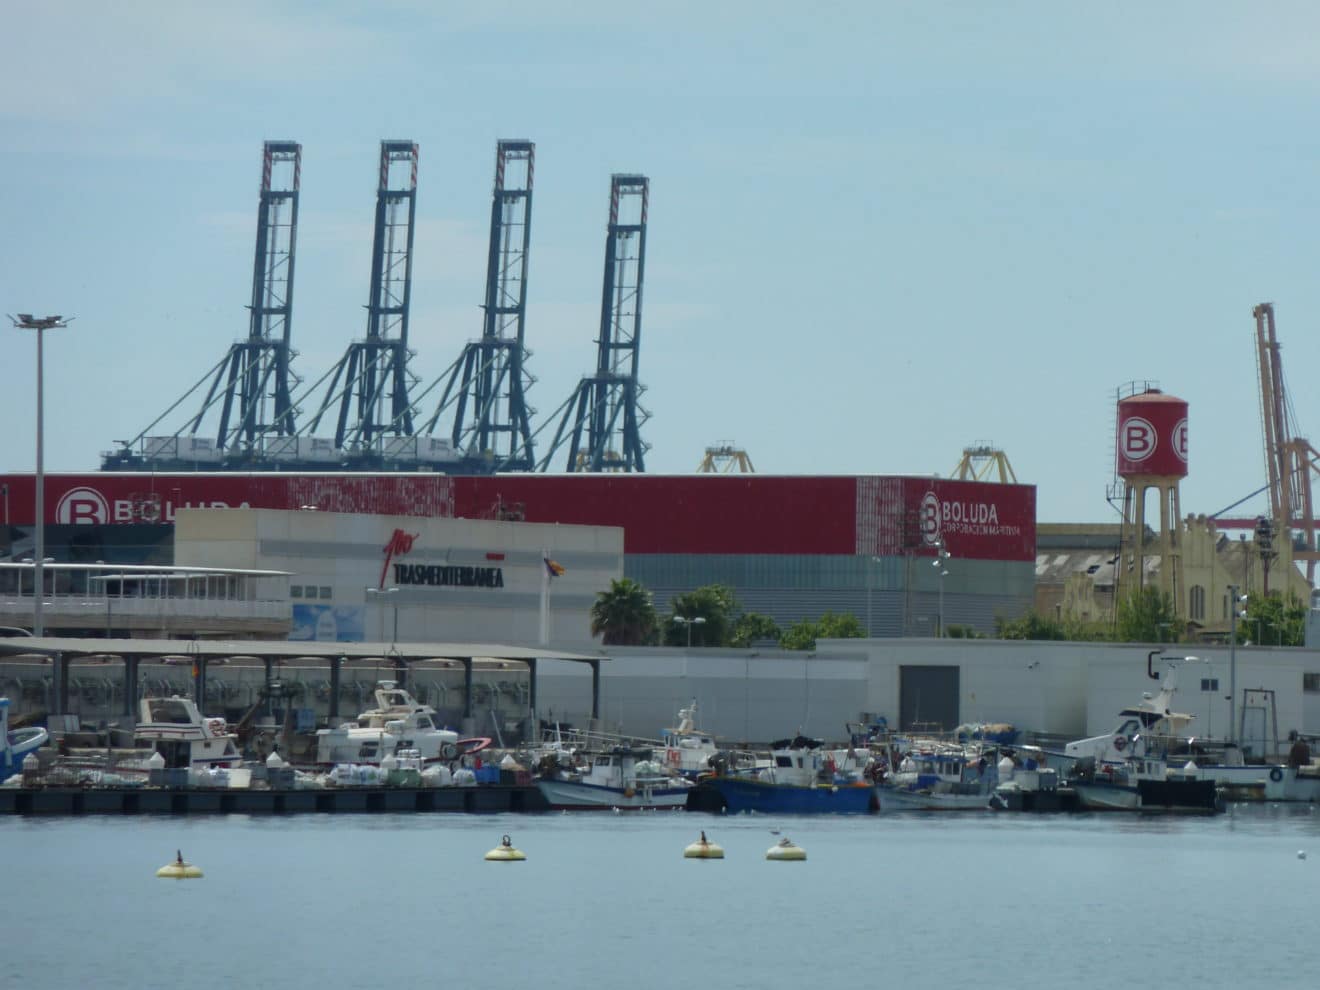 Valenciaport, A Strategic Port For The Agri-food Industry That Increases Its Exports By 40% In The First Quarter Of The Year